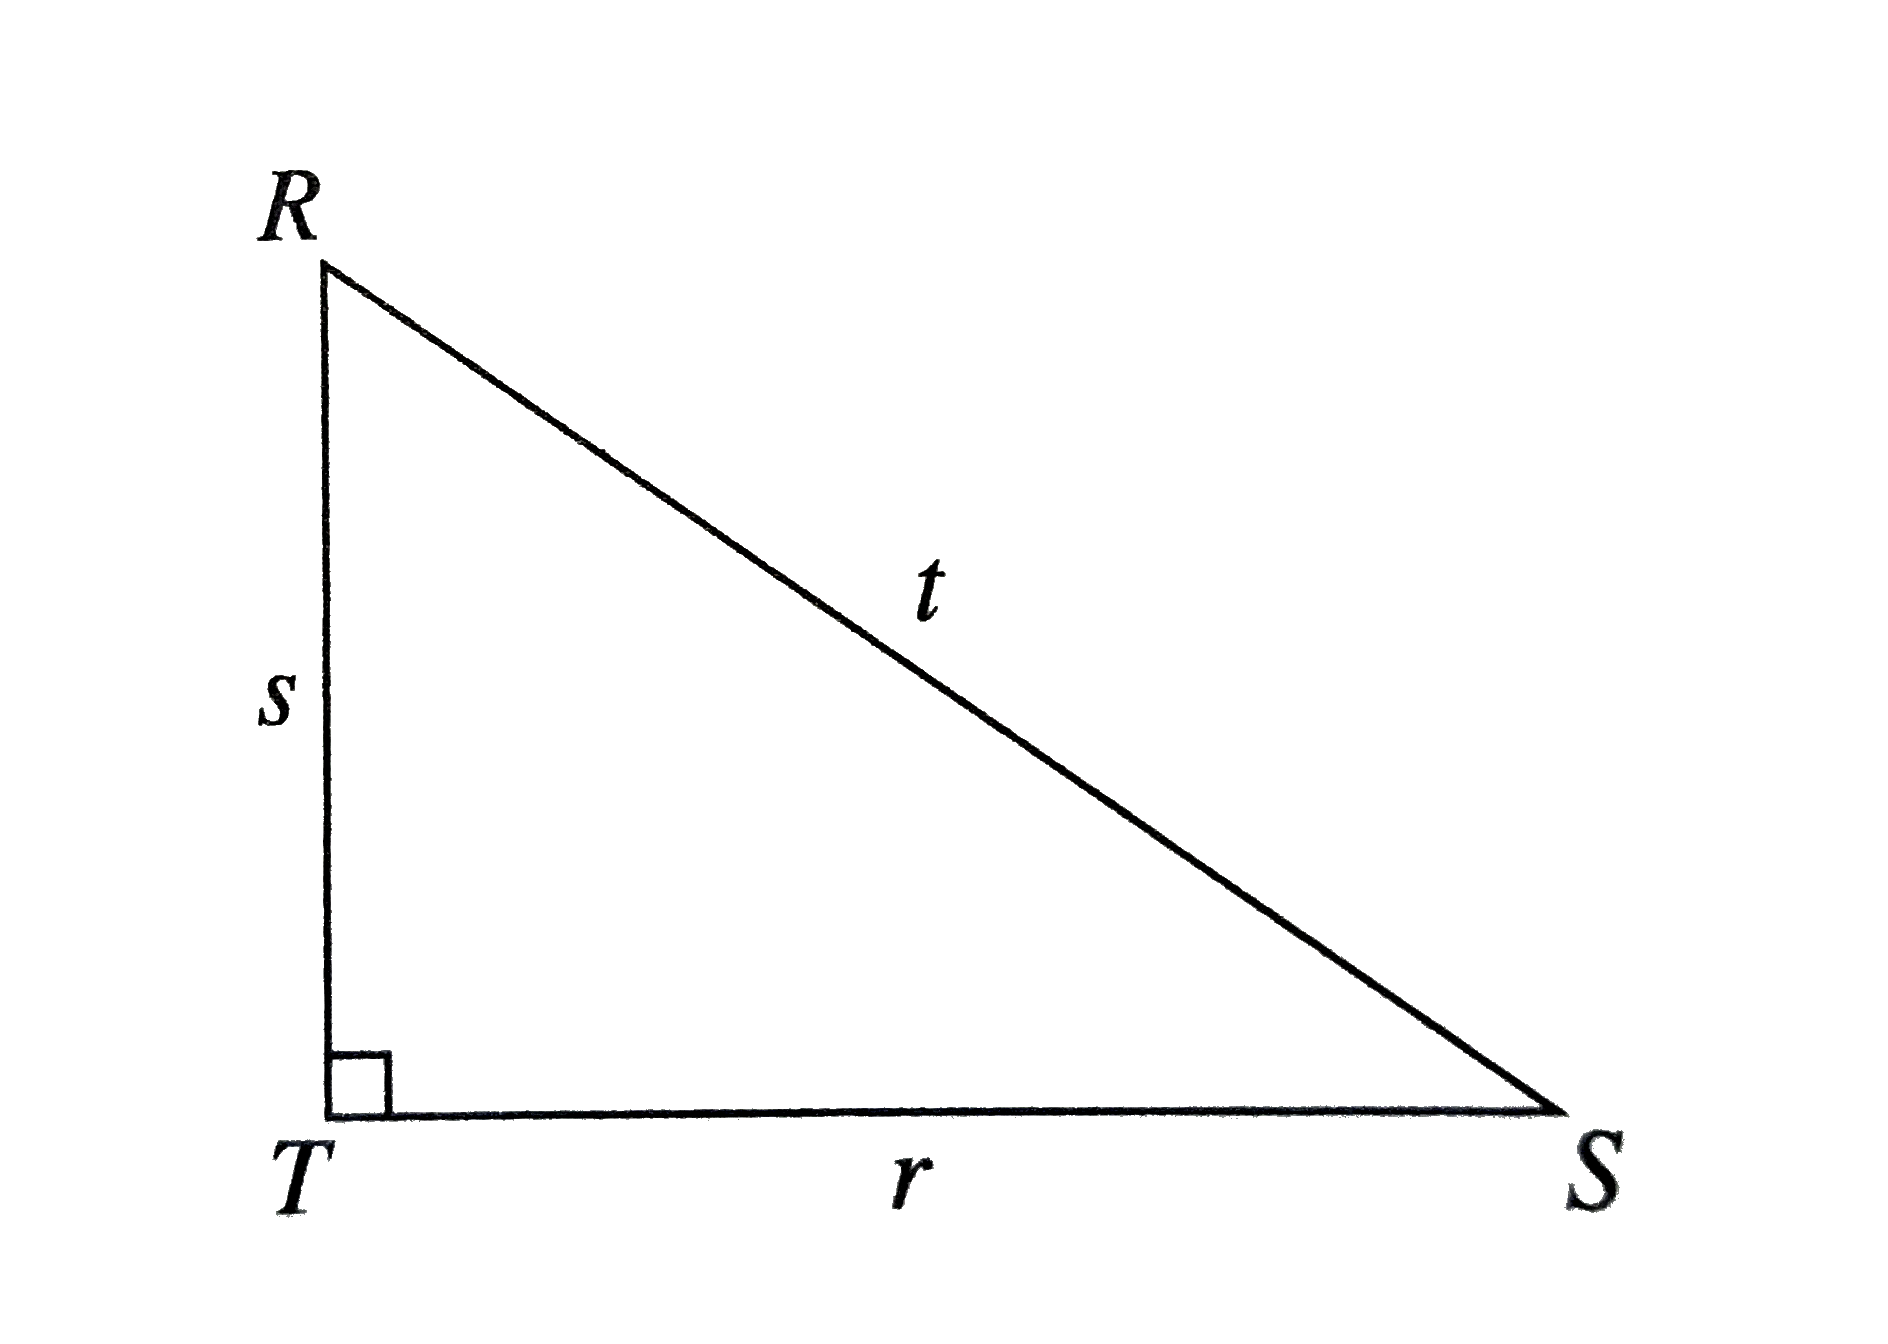 RST  is a  right triangle  with side  lengths of r,s, and  t, as  shown  below what  is the  value  of  cos  ^2 S+ cos  ^2 R  ?